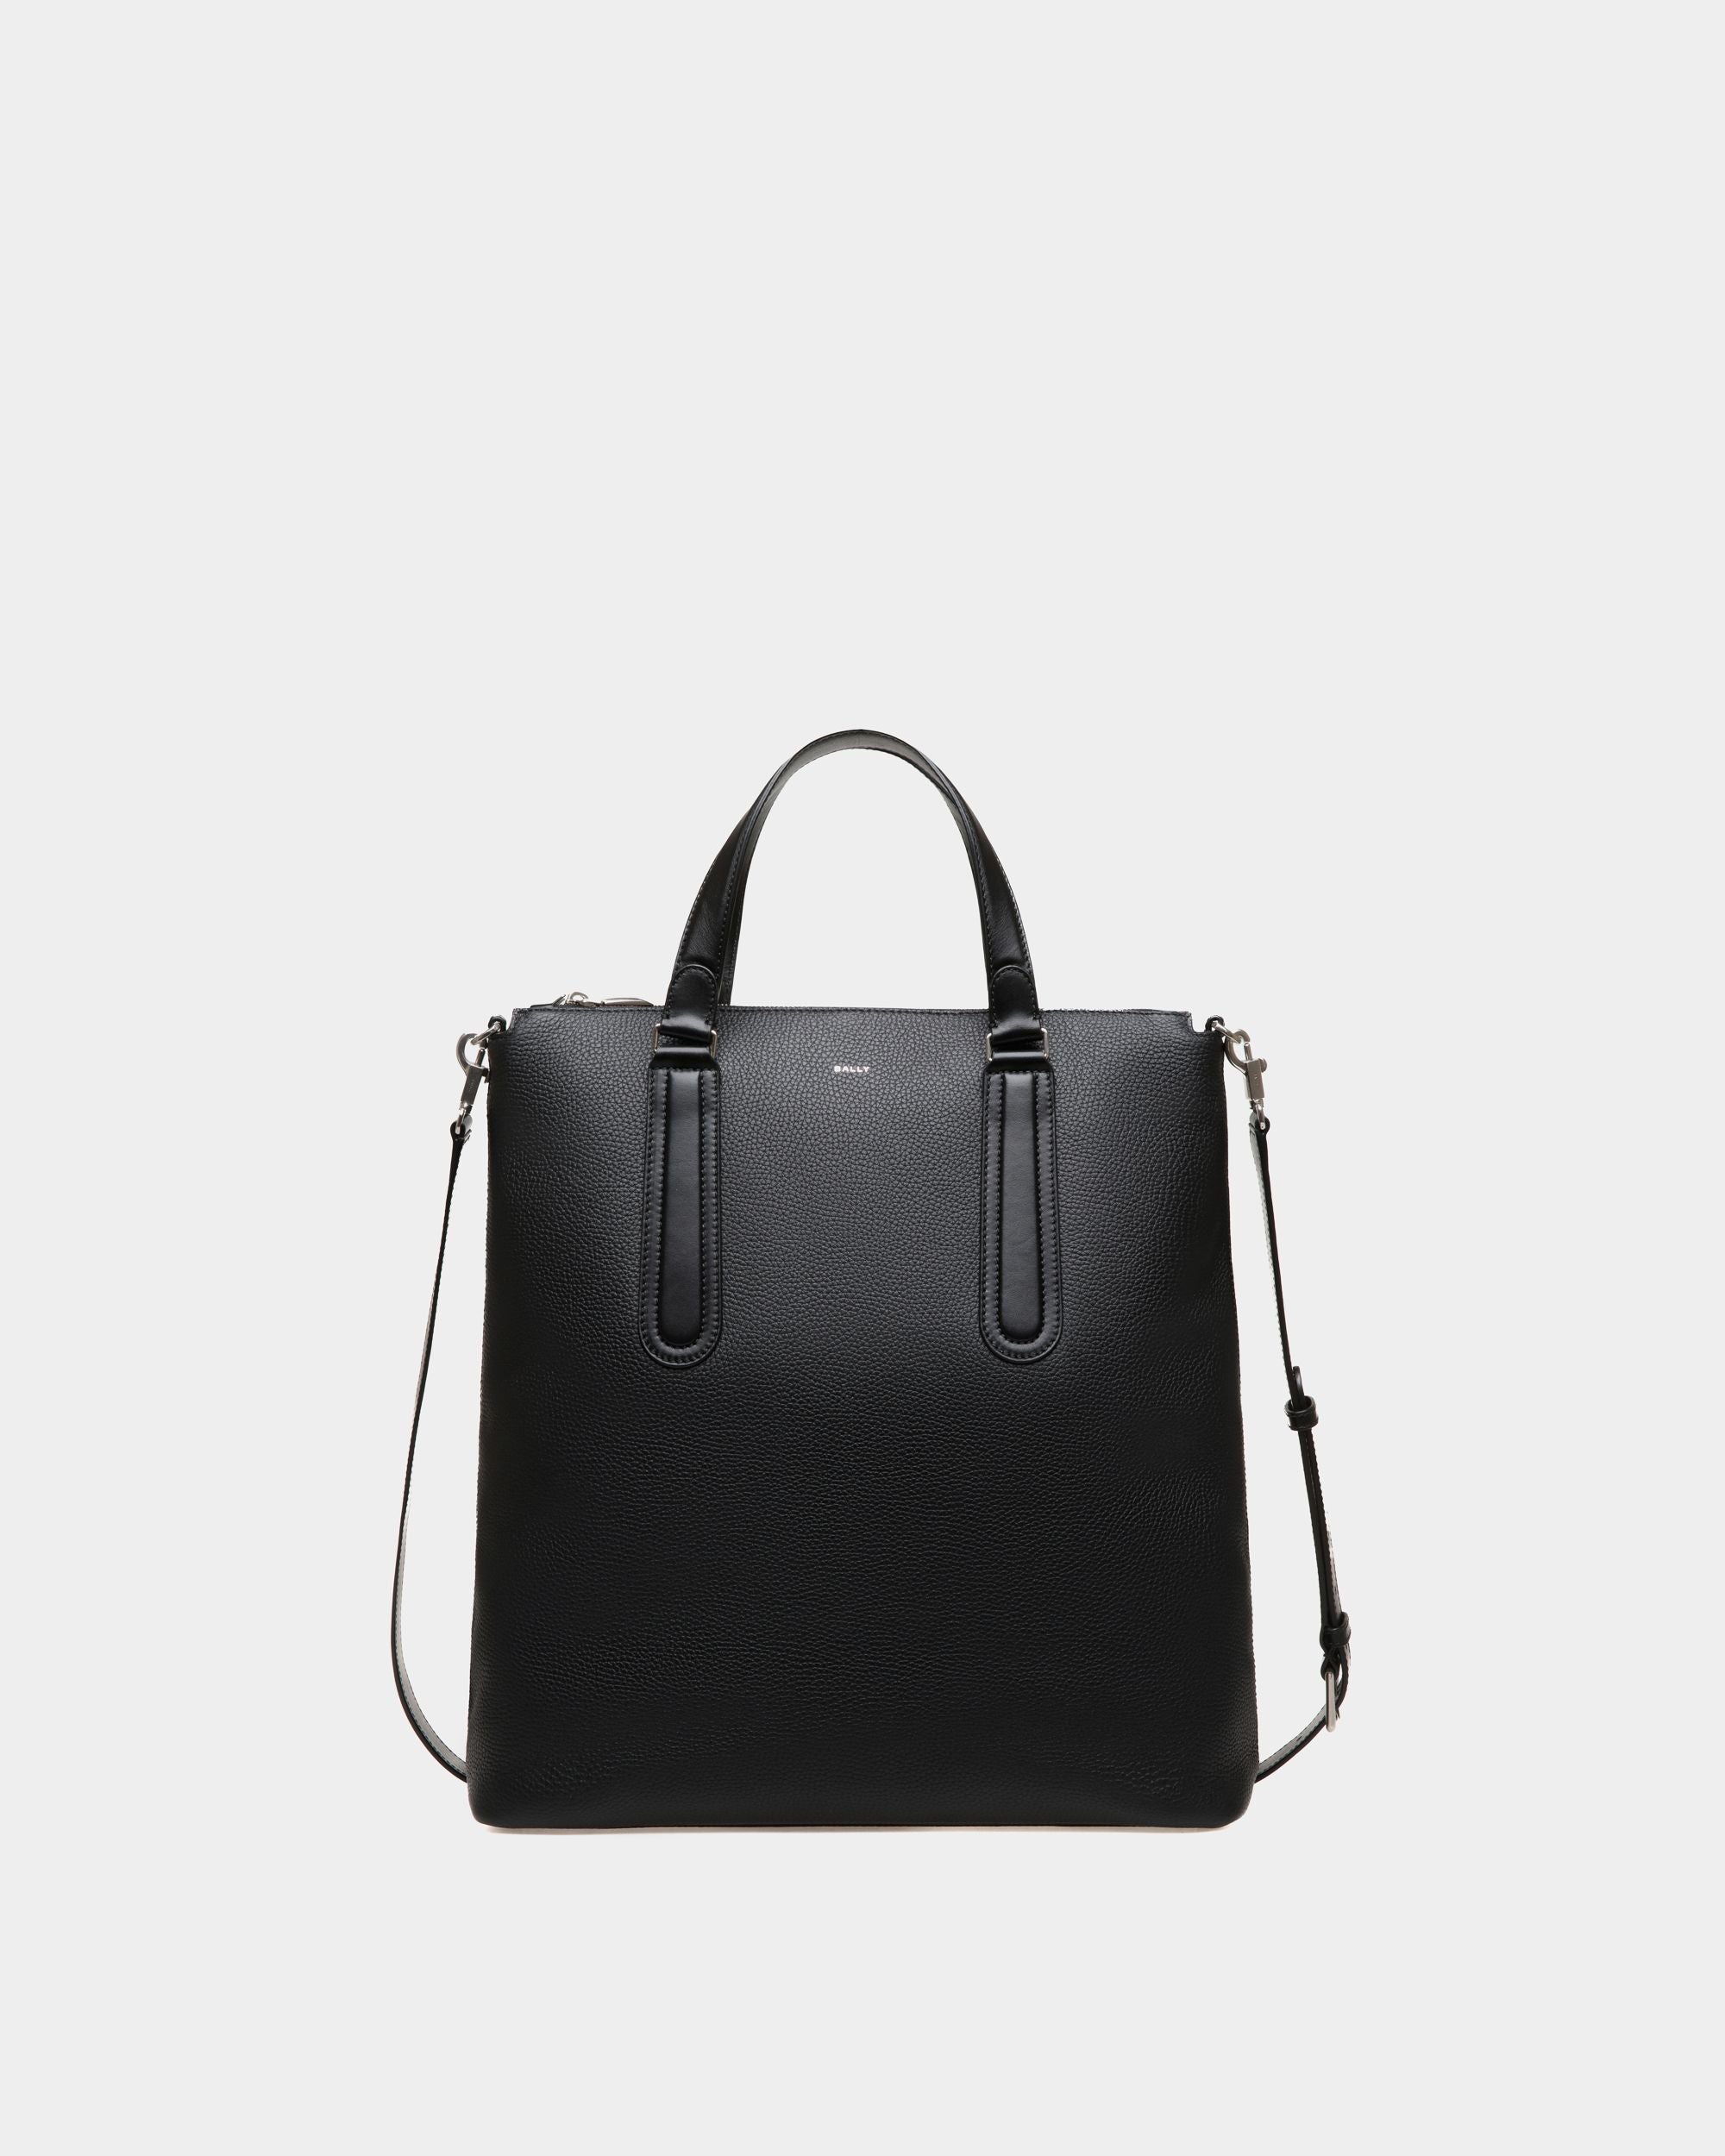 Spin | Men's Tote in Black Grained Leather | Bally | Still Life Front